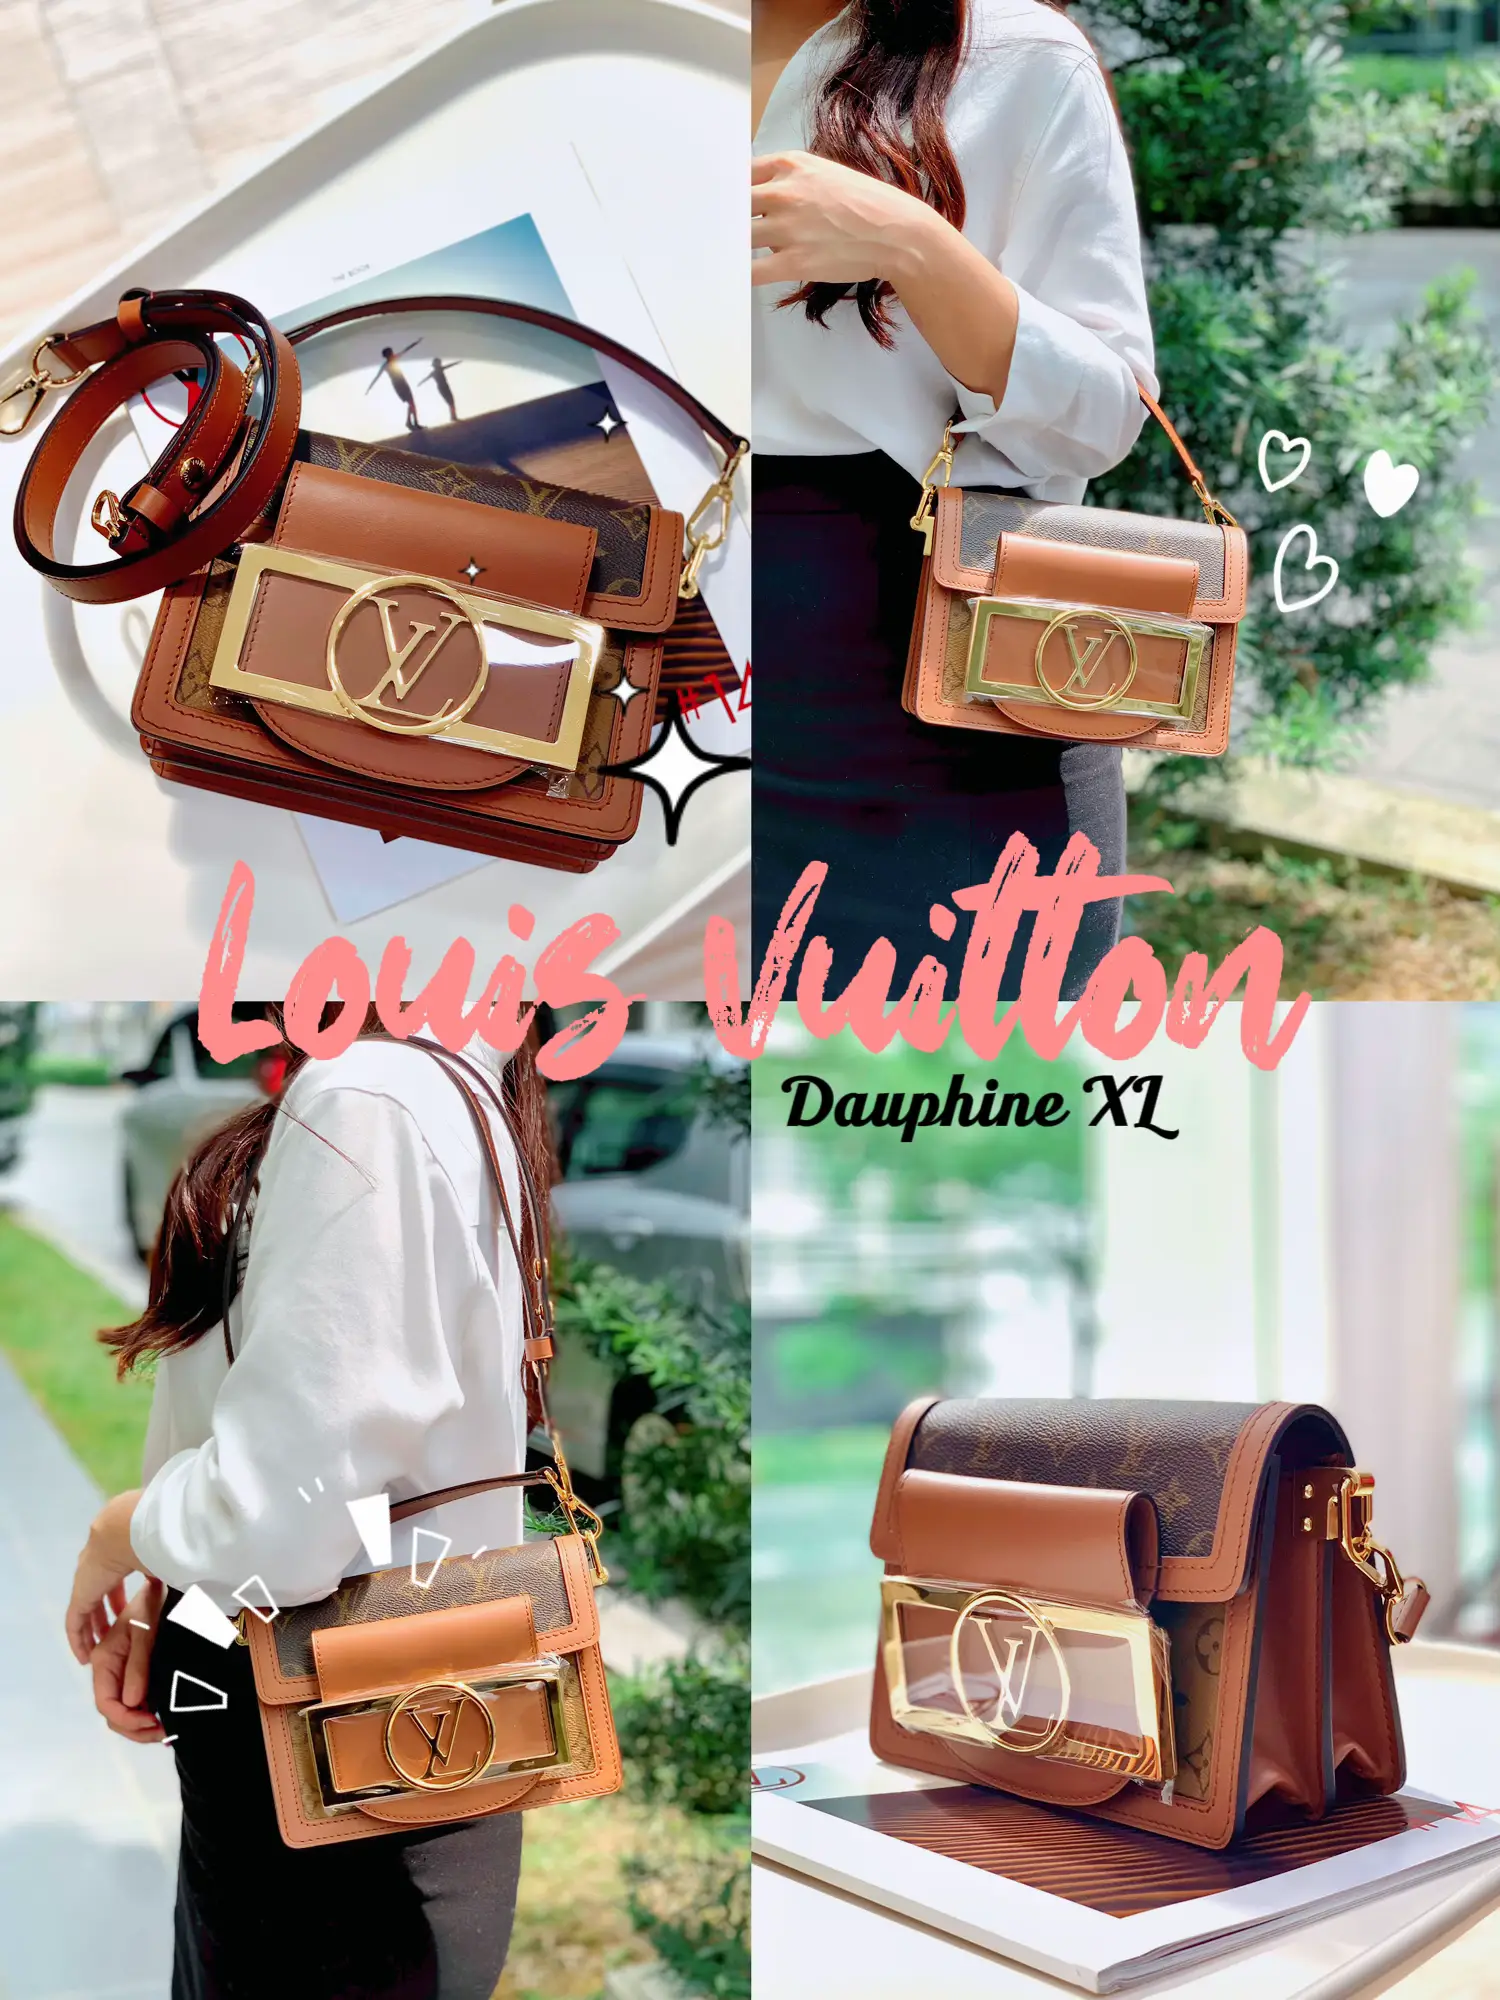 YOU'LL BE SURPRISED WITH THIS NEW LV DAUPHINE!!!